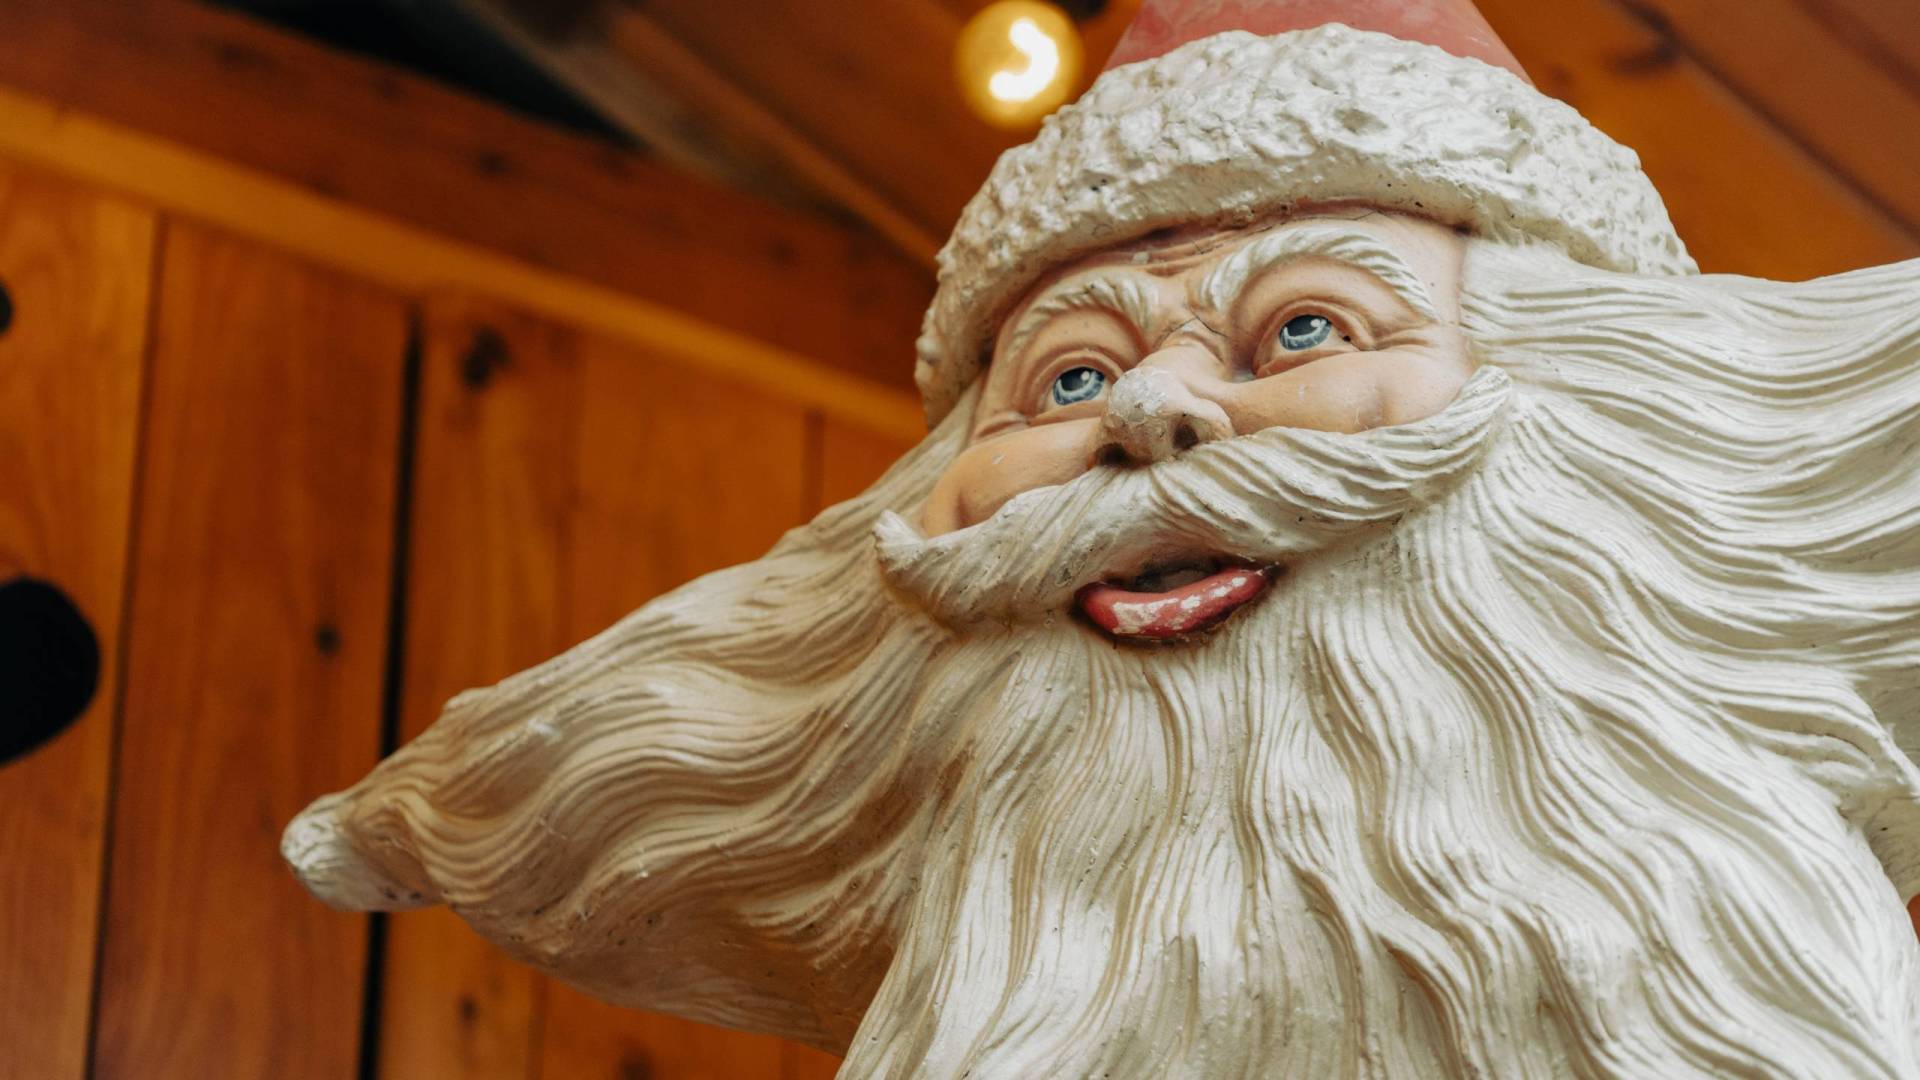 A Santa Claus statue viewed from the neck up.